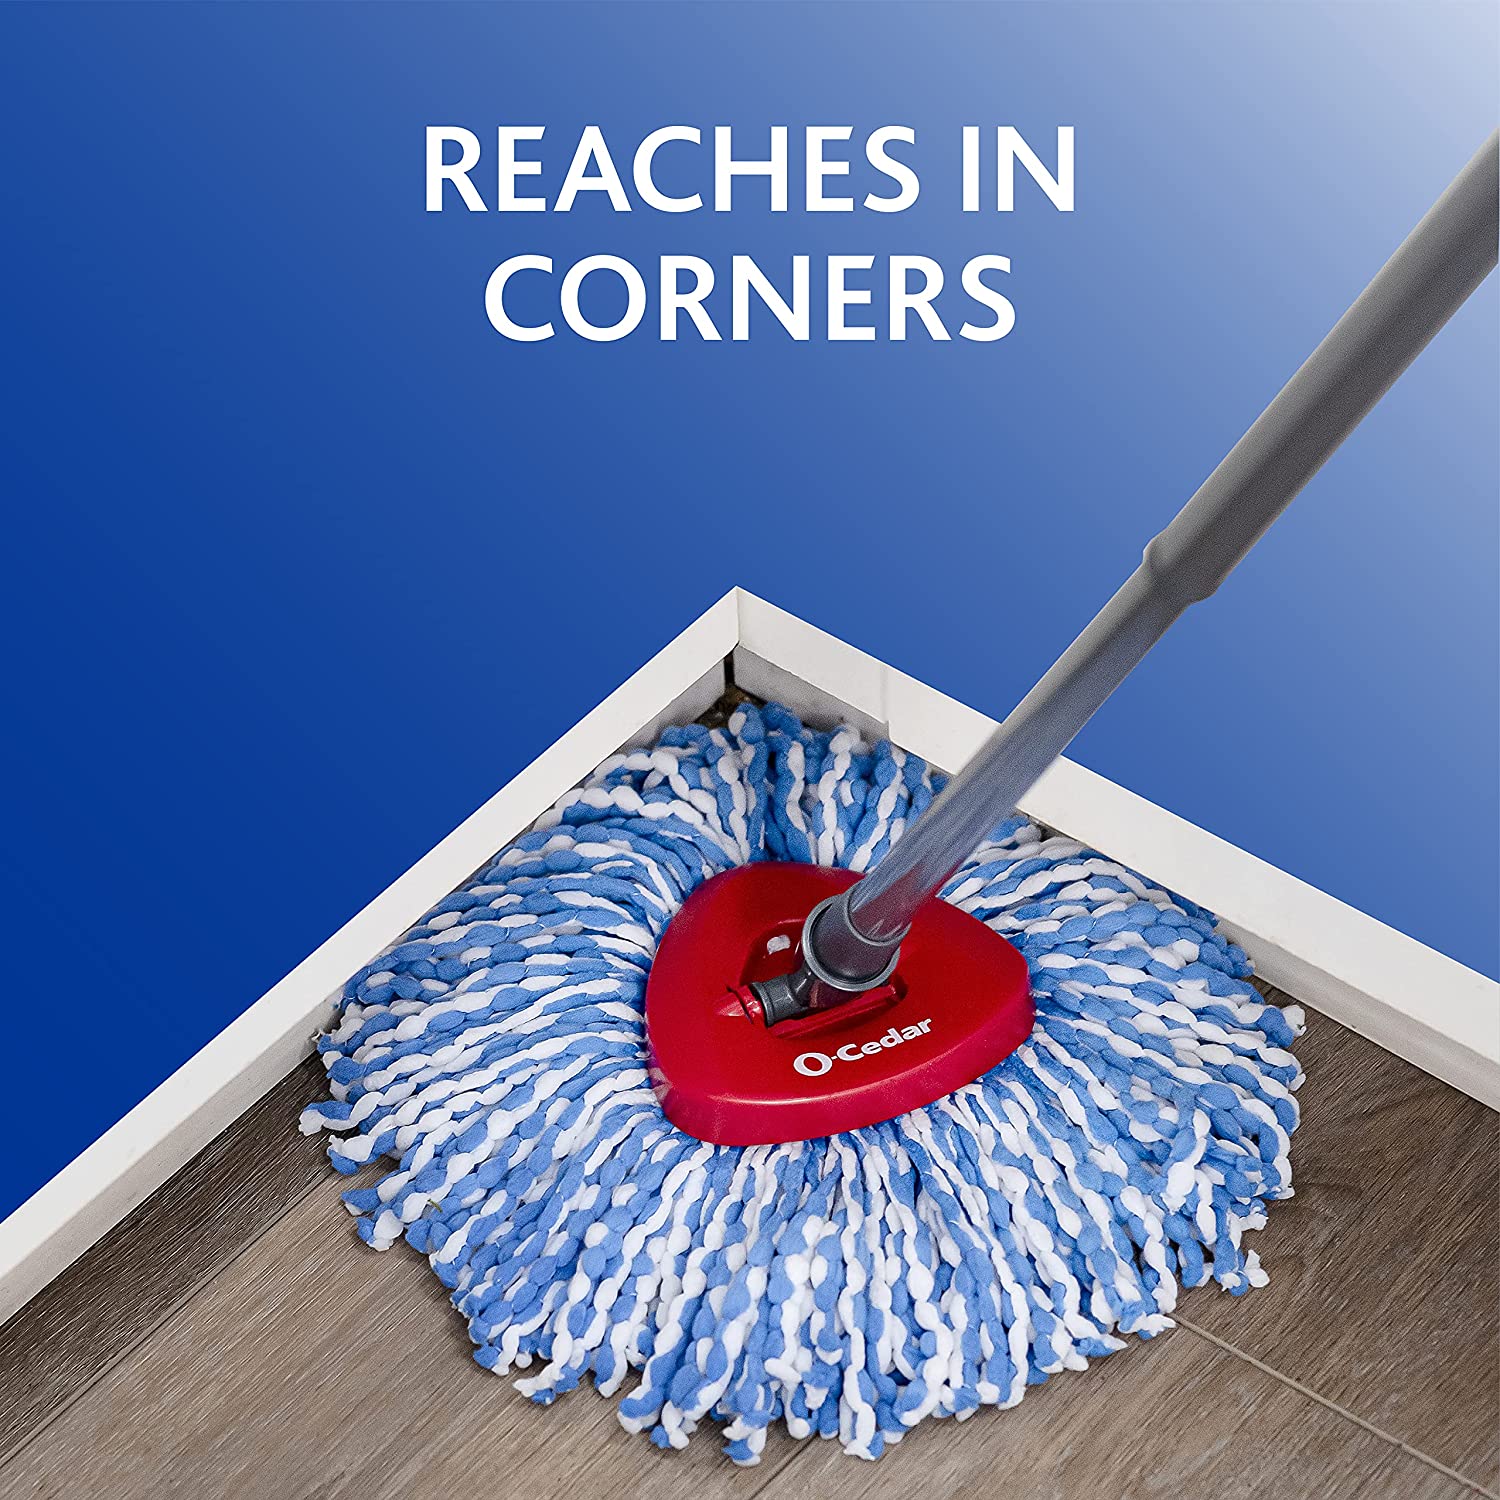 https://bigbigmart.com/wp-content/uploads/2022/12/O-Cedar-EasyWring-RinseClean-Microfiber-Spin-Mop-Bucket-Floor-Cleaning-System-with-2-Extra-Refills-6.jpg